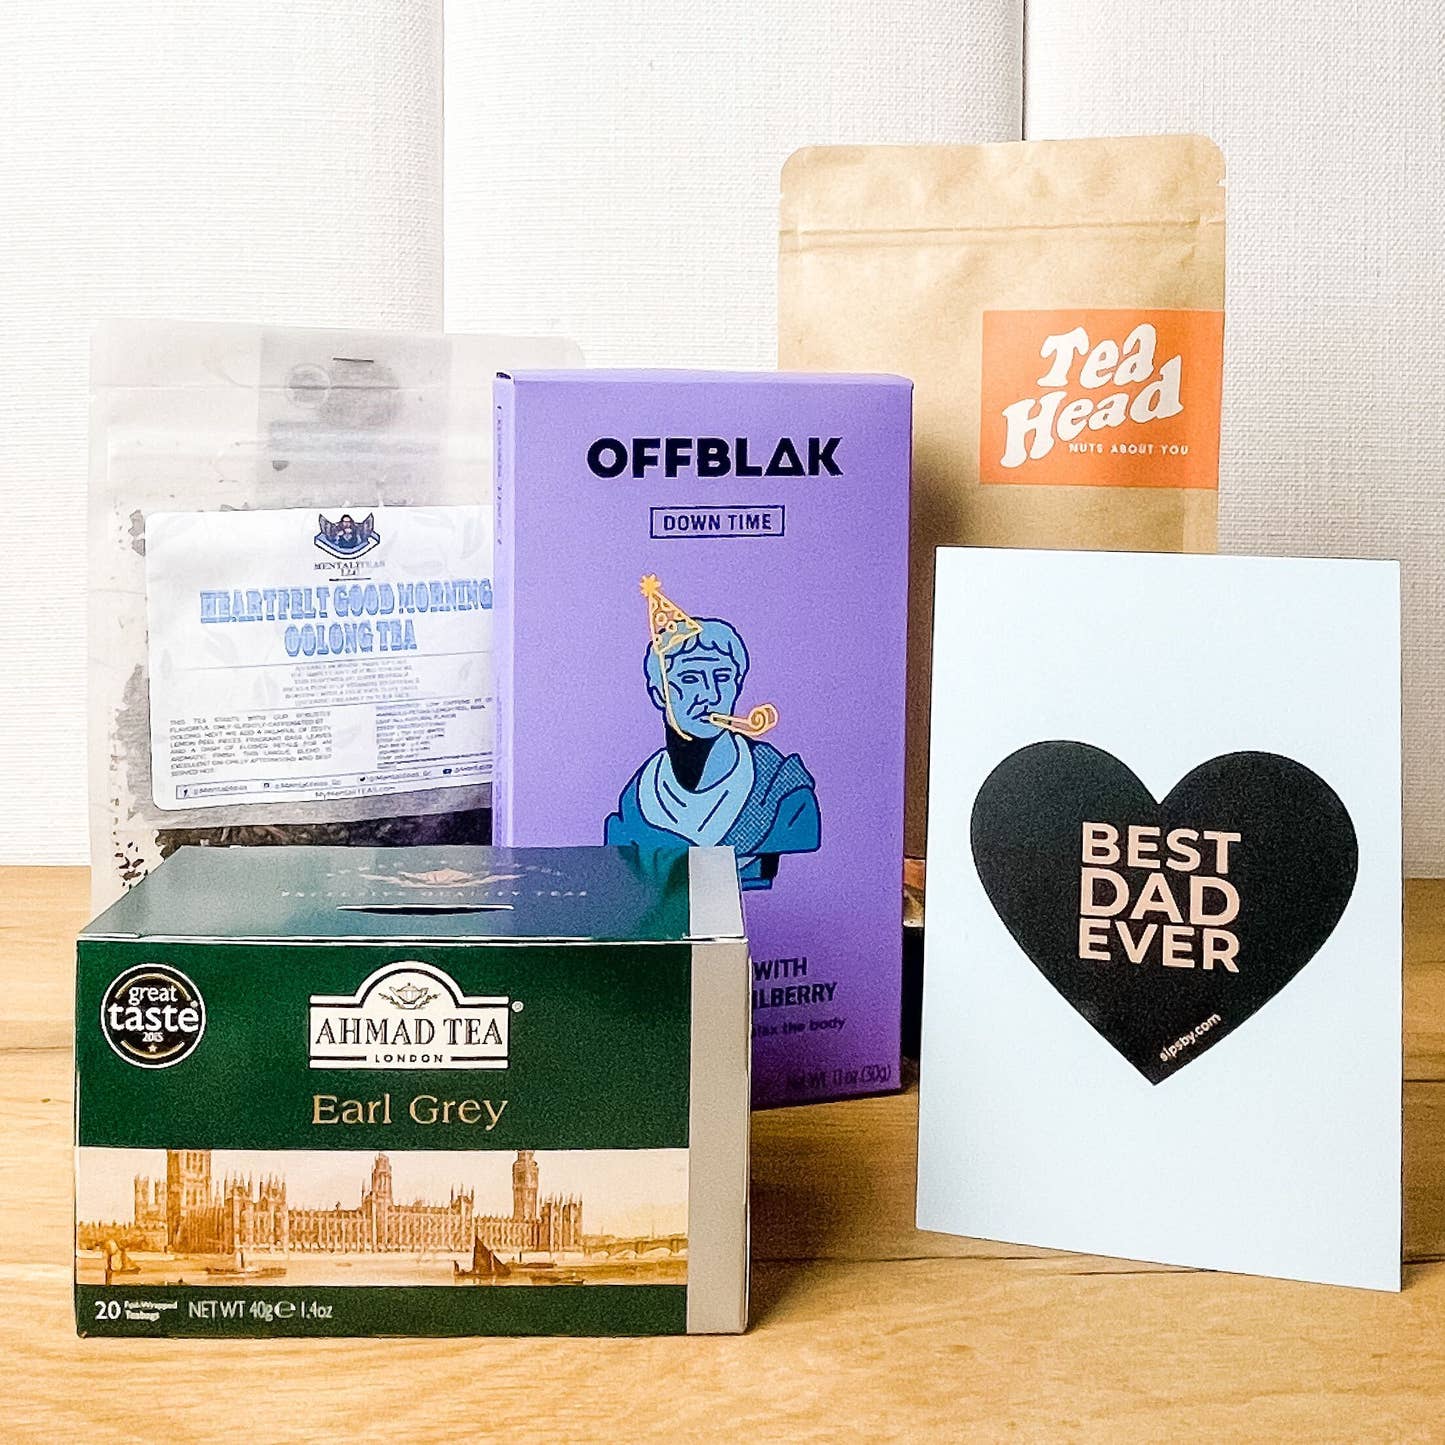 Four full-sized tea packages from OFFBLAK, Tea Head, Mentaliteas, and Ahmad Tea for the Father's Day Tea Care Package and a Sips by "Best Dad Ever" blue postcard with a heart